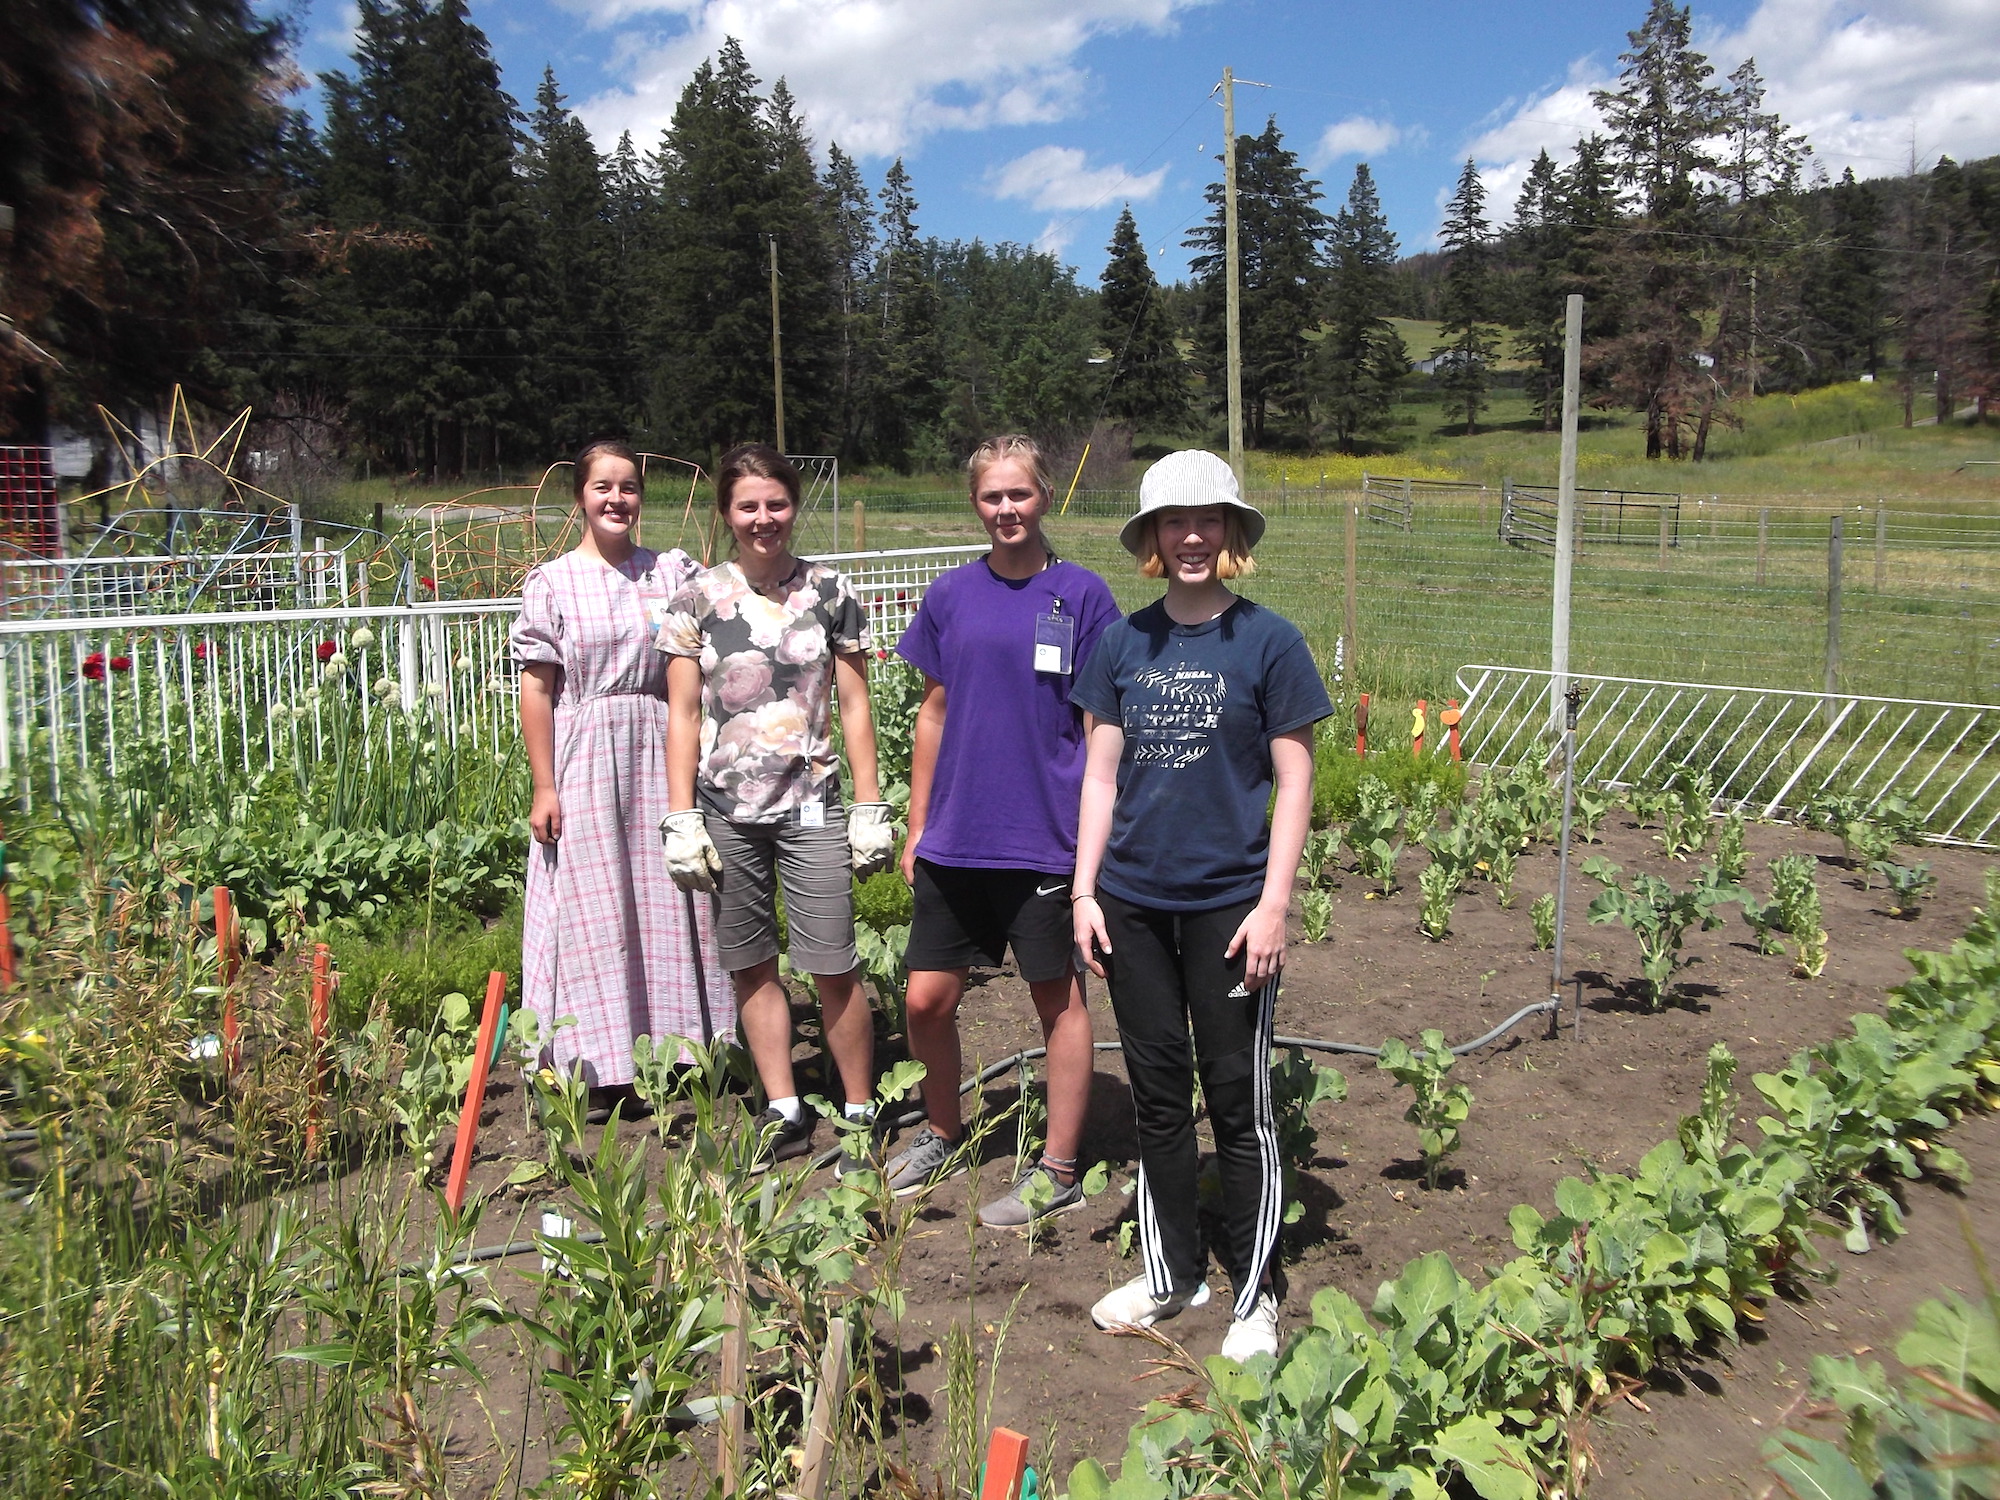 Volunteers in Monte Lake pose for a small group image in a garden